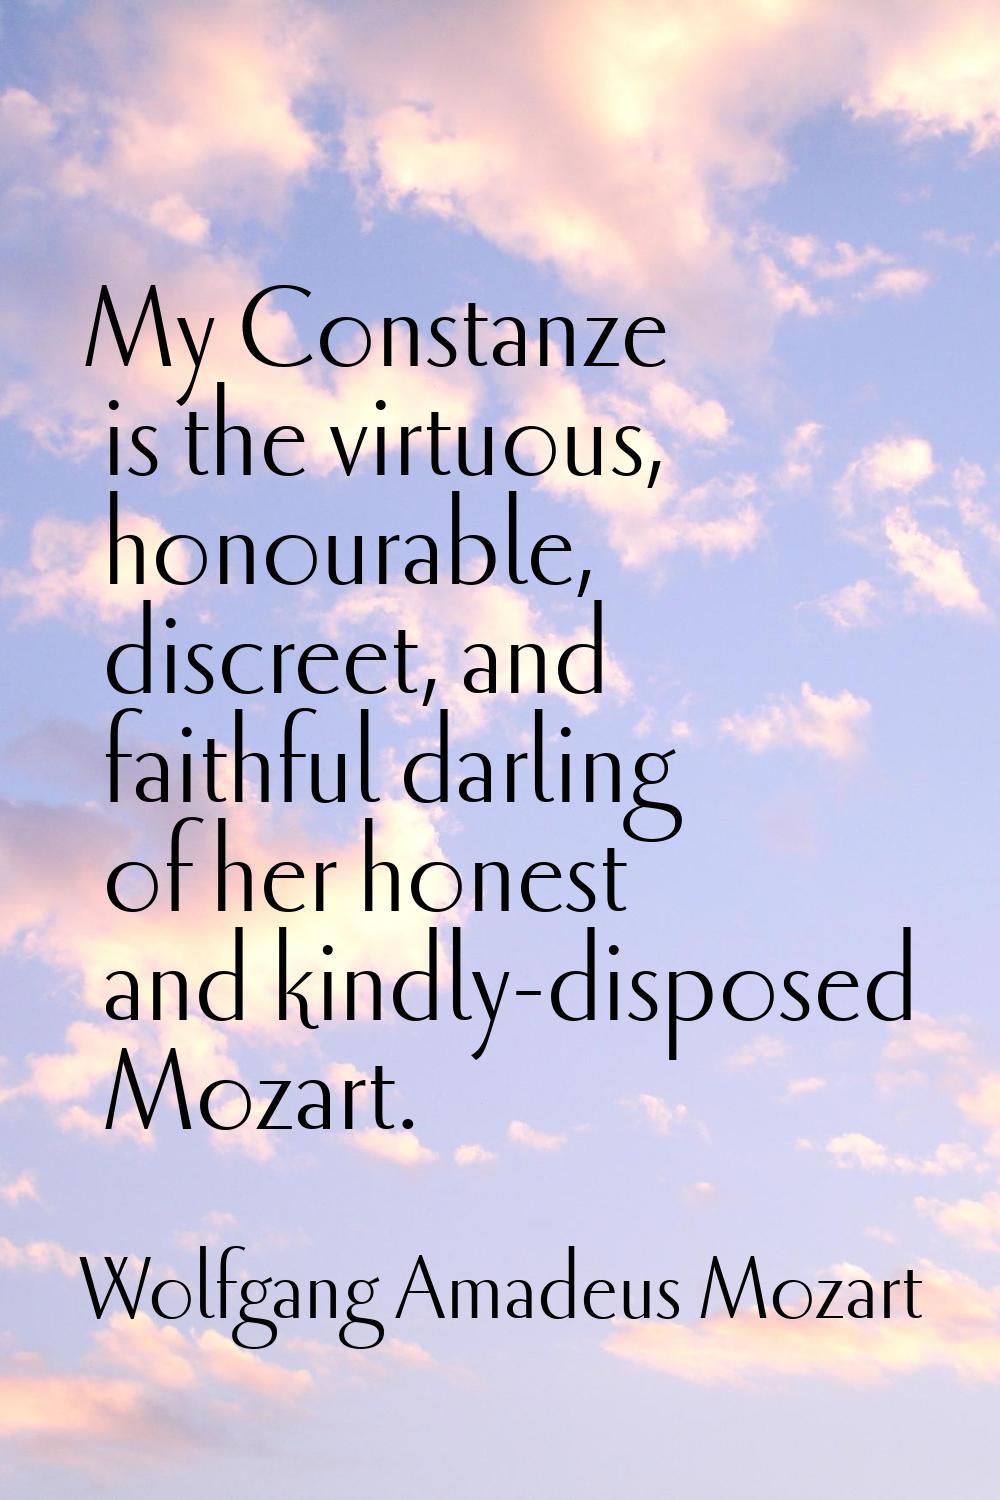 My Constanze is the virtuous, honourable, discreet, and faithful darling of her honest and kindly-d